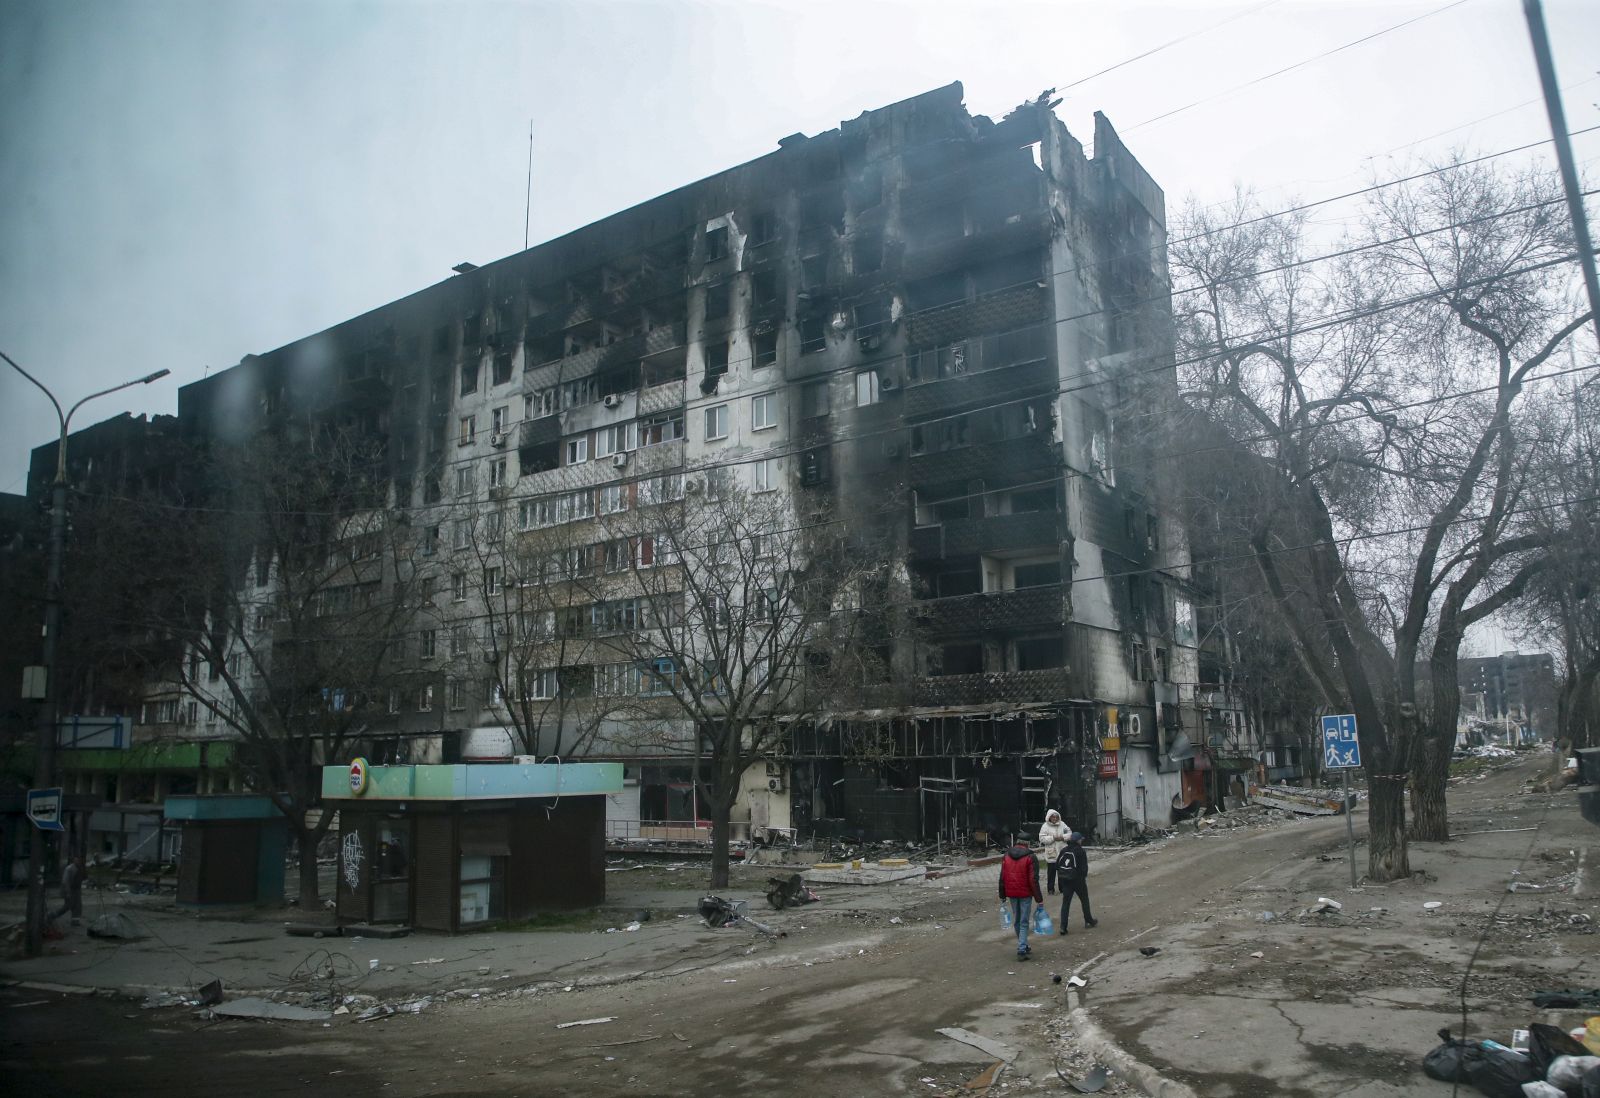 epa09887016 A picture taken during a visit to Mariupol organized by the Russian military shows local people cary water near devesteted and burned apartment building in downtown Mariupol, Ukraine, 12 April 2022. For more than a month, hostilities have continued in the city. There is no water, electricity, gas or communications. Shops, pharmacies and hospitals are closed. 250 thousand inhabitants left the city, about 300 thousand still remain. During the hostilities, up to 70 percent of the housing stock of Mariupol was destroyed and five thousand residents of the city was killed said the new mayor of the city Konstantin Ivashchenko. On 24 February Russian troops had entered Ukrainian territory in what the Russian president declared a 'special military operation', resulting in fighting and destruction in the country, a huge flow of refugees, and multiple sanctions against Russia.  EPA/SERGEI ILNITSKY